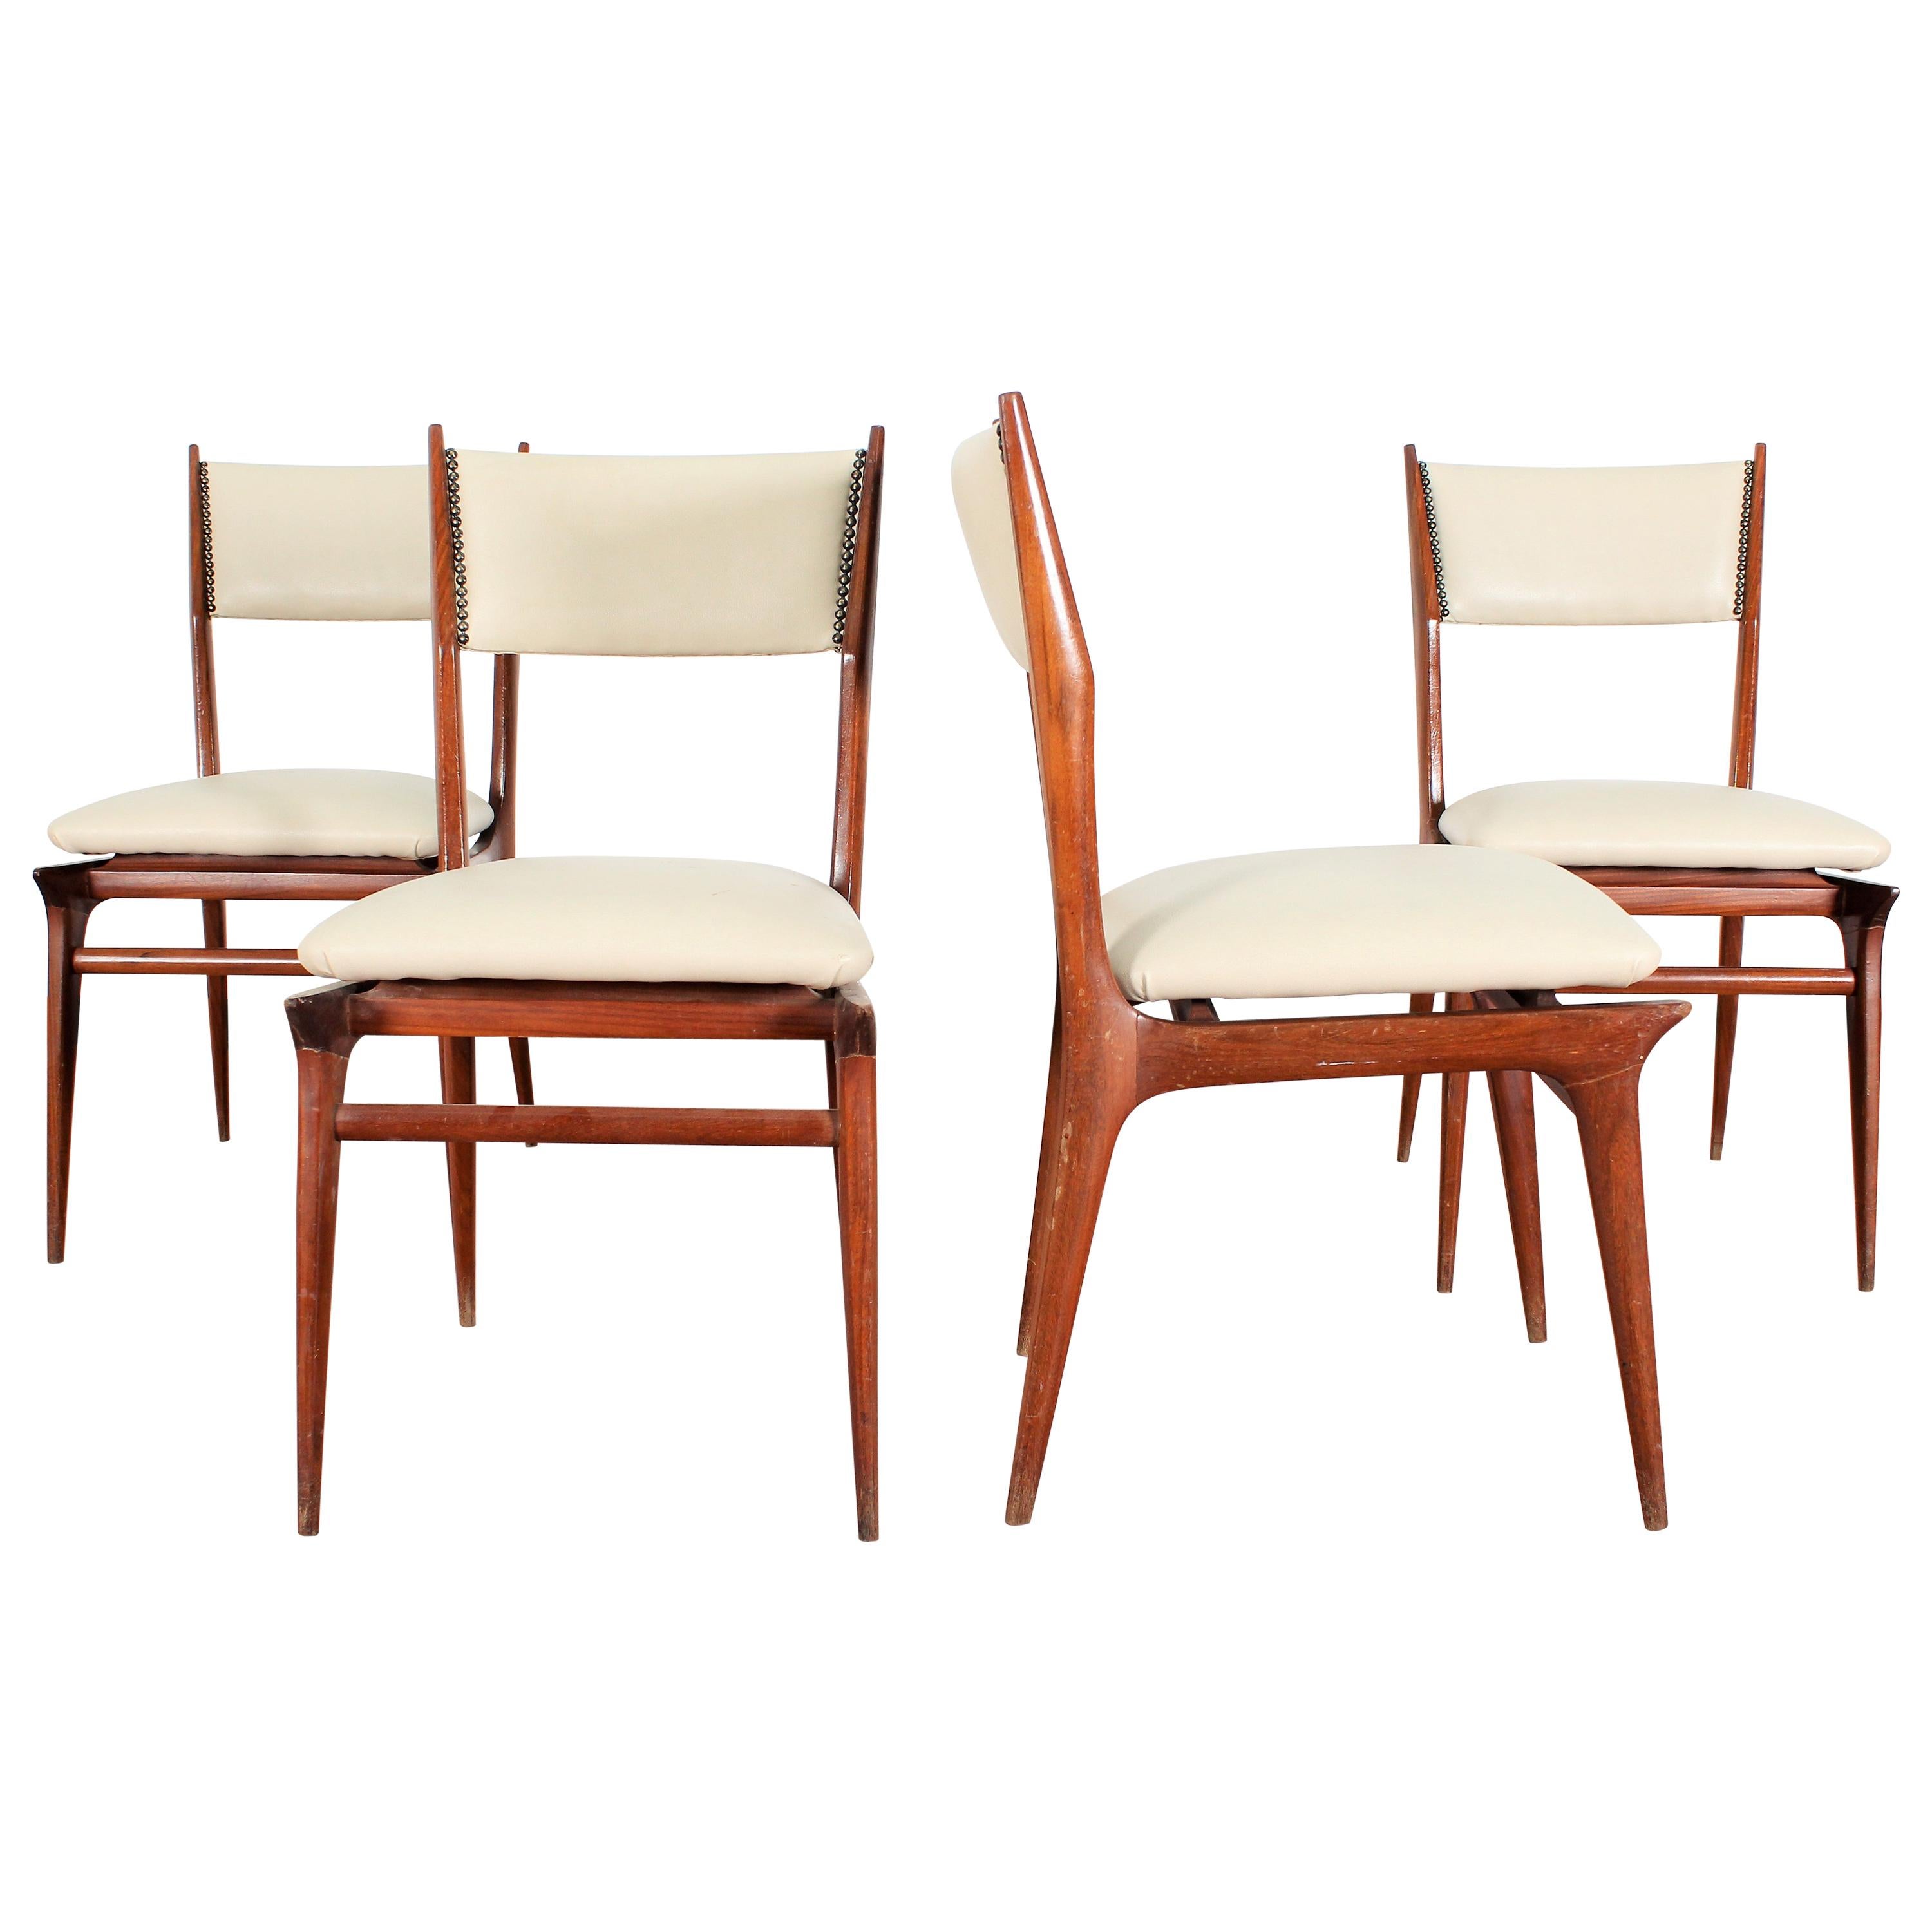 Midcentury Wood and Leatherette Chairs Carlo de Carli Italy 1950s Set of 4